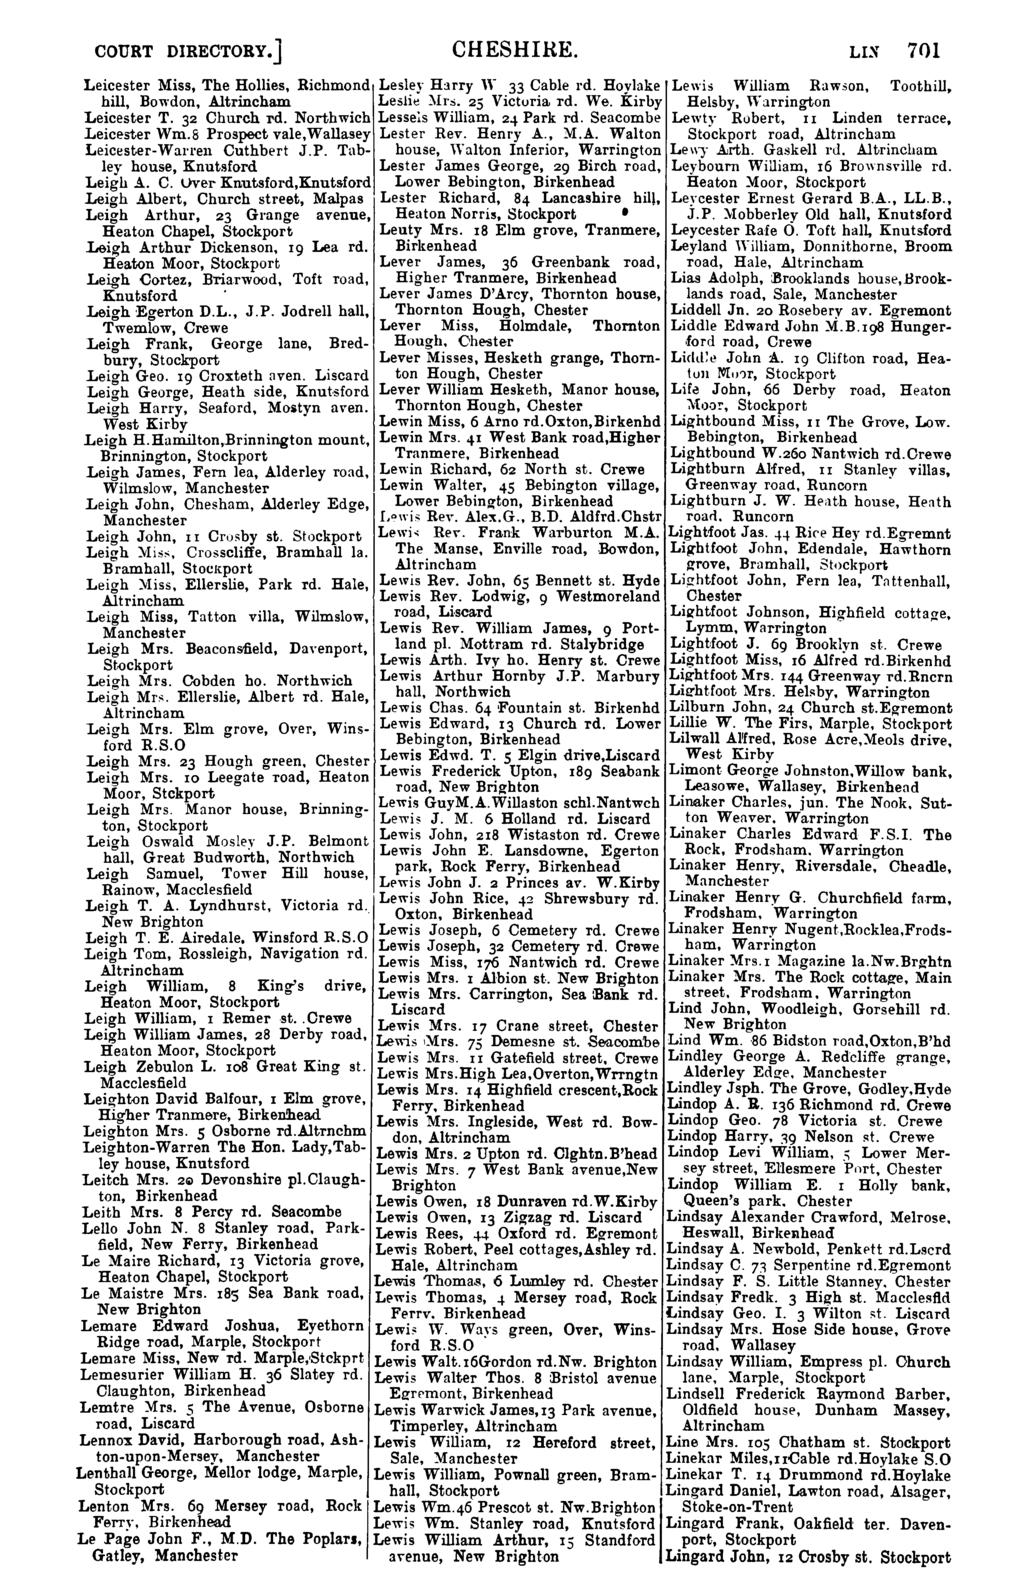 COURT DIRECTORY.] CHESHIRE. LIS 701 Leicester Miss, The Hollies, Richmond Lesley H:lrry W 33 Cable rd. Hoylake Lewis William Rawson, Toothill, hill, Bowdon, Altrincham Leslie :\Ir:s. 25 Victuria rd.